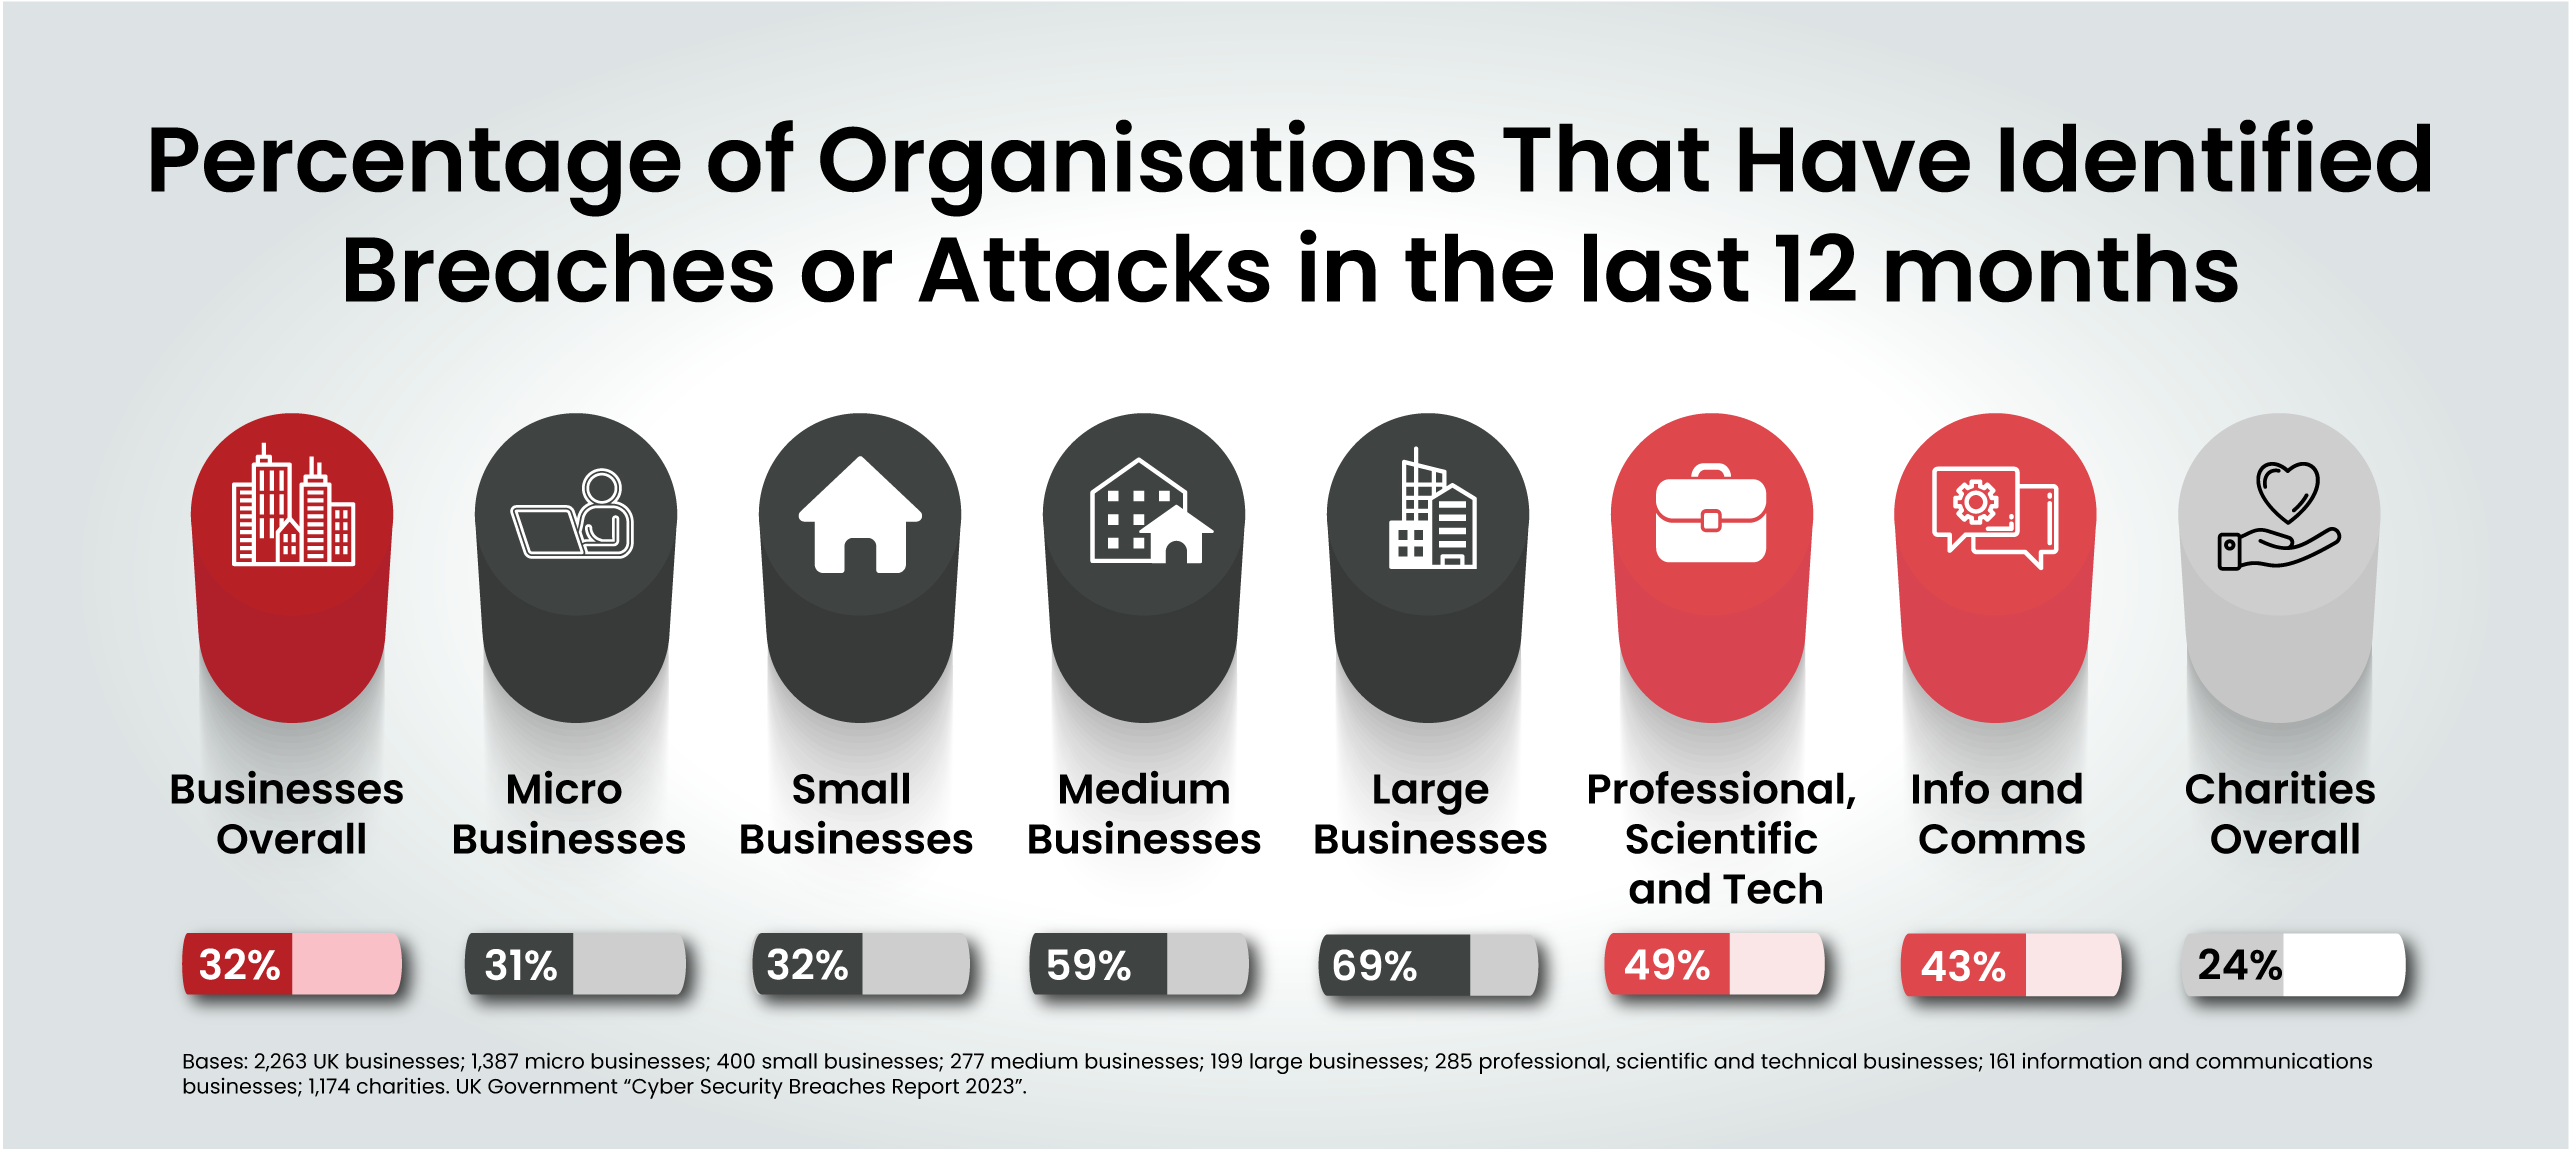 Organisations who identified a Data Breach in the last 12 months